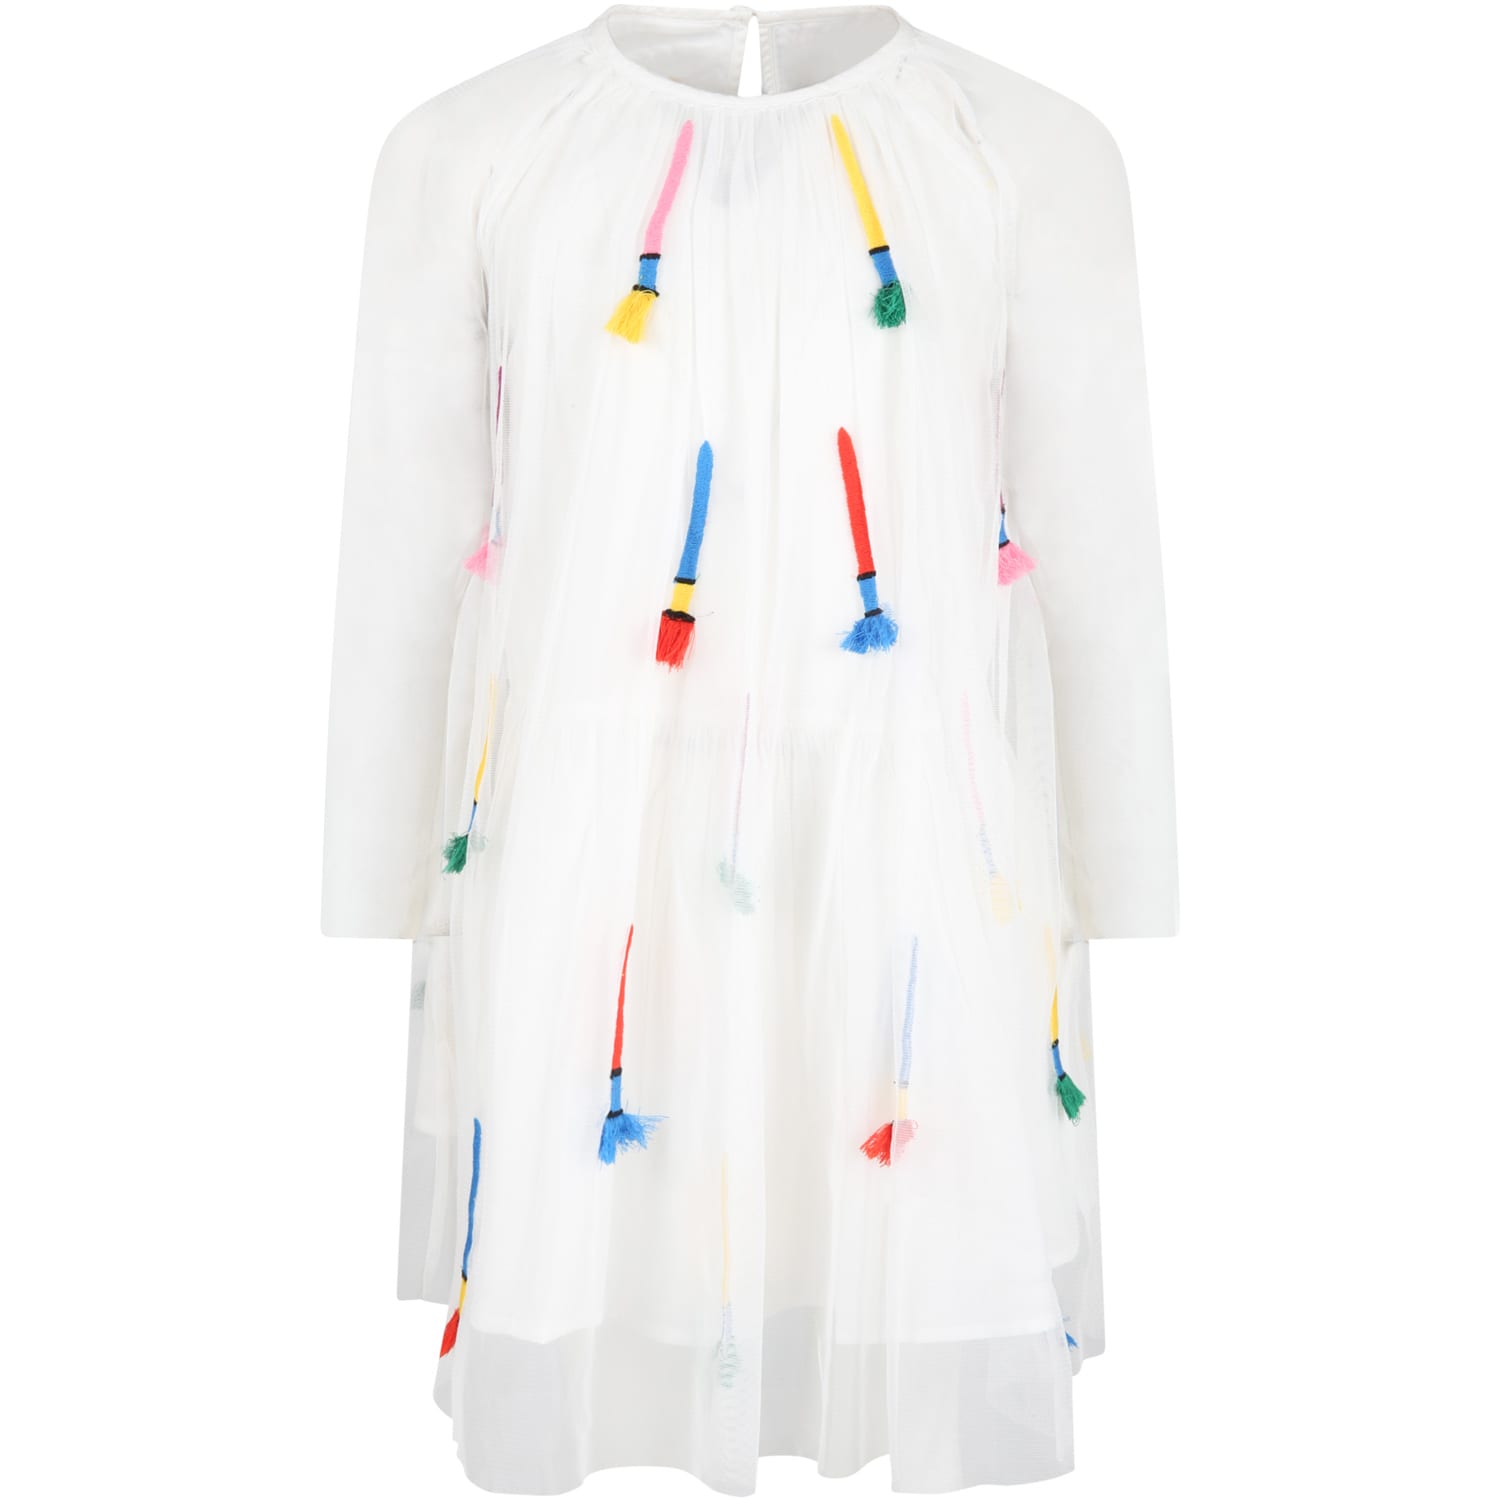 Stella McCartney Kids White Dress For Girl With Colorful Details